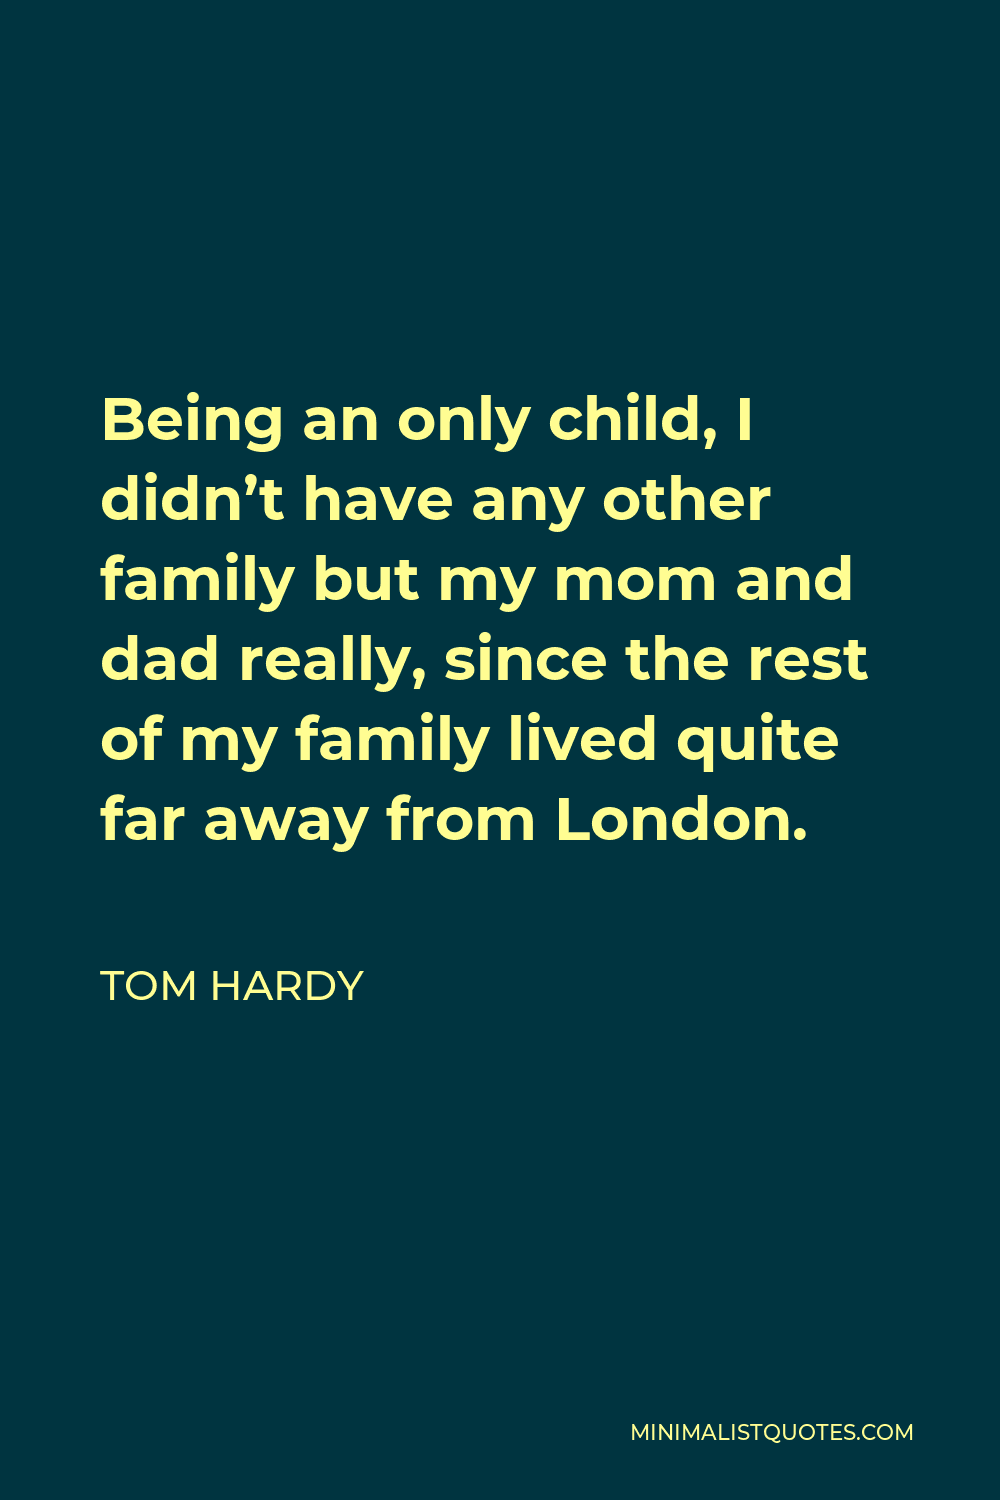 Tom Hardy Quote - Being an only child, I didn’t have any other family but my mom and dad really, since the rest of my family lived quite far away from London.